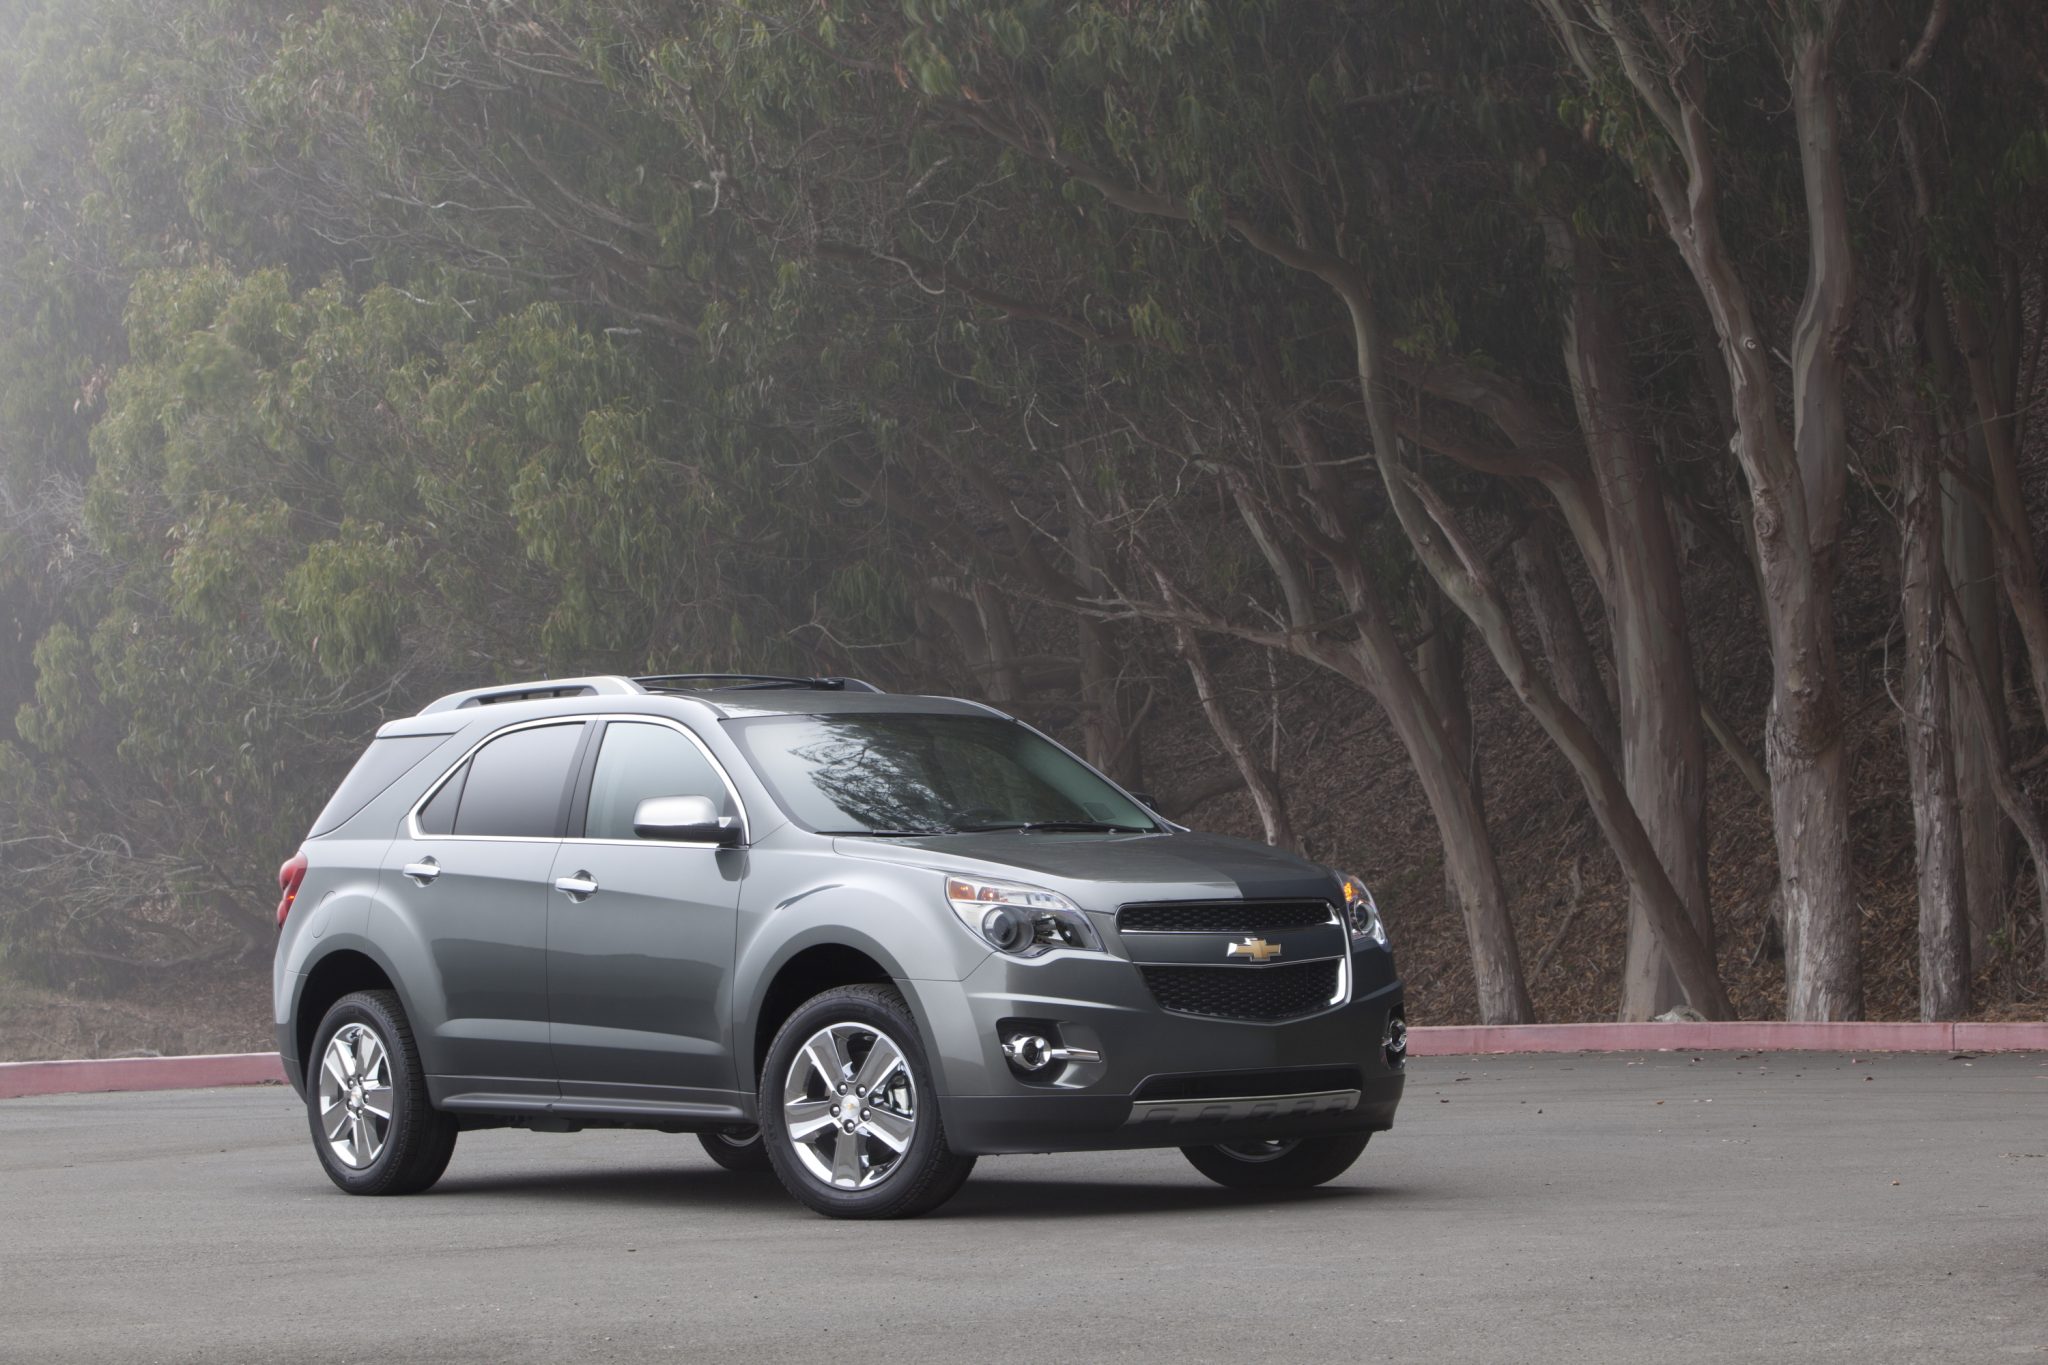 updates-for-the-2015-chevy-equinox-announced-the-news-wheel